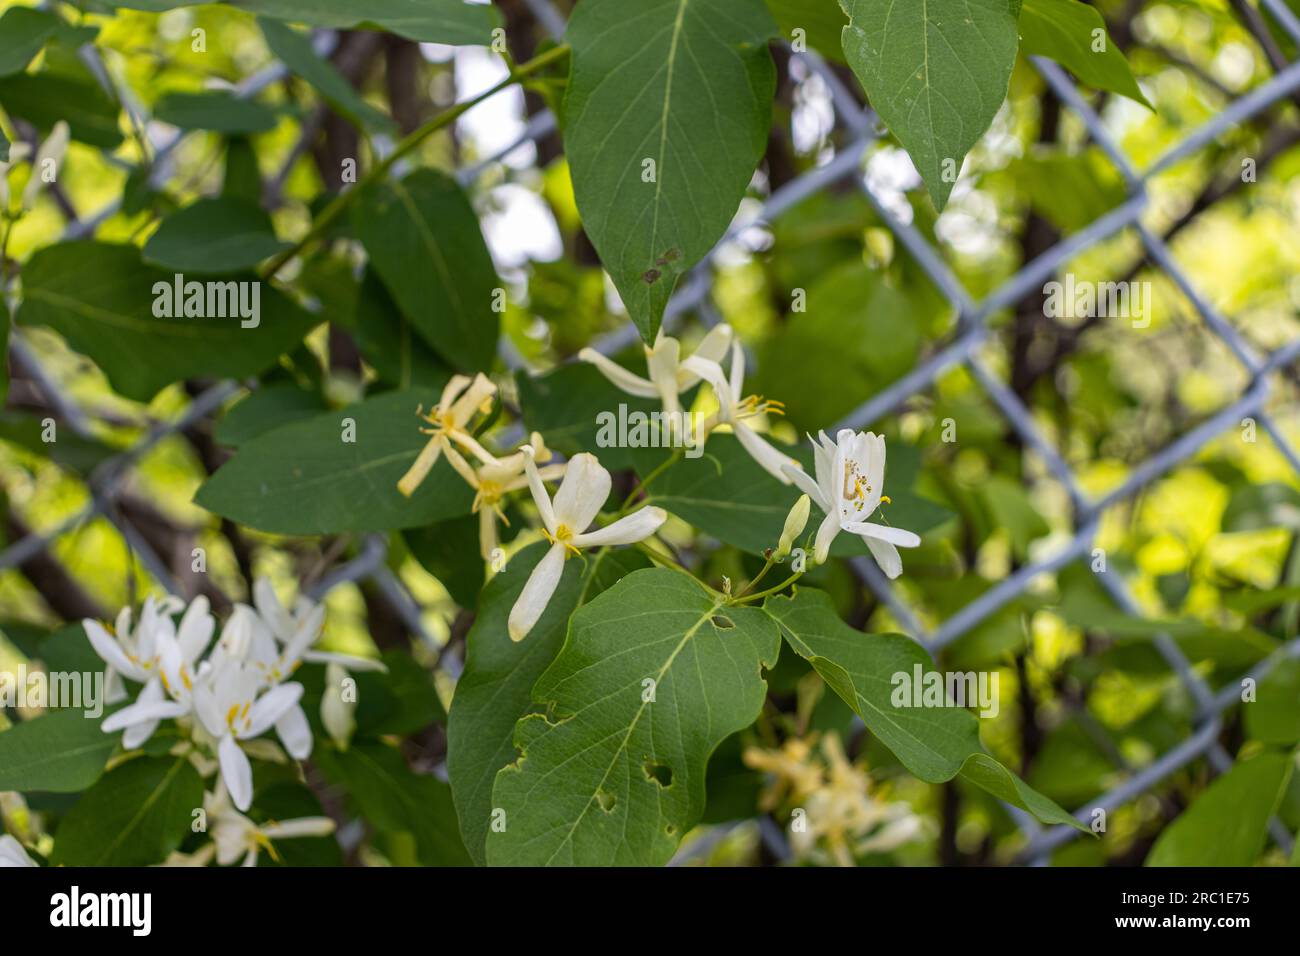 White yellow honeysuckle flowers - blurred fence leaf background. Taken in Toronto, Canada. Stock Photo